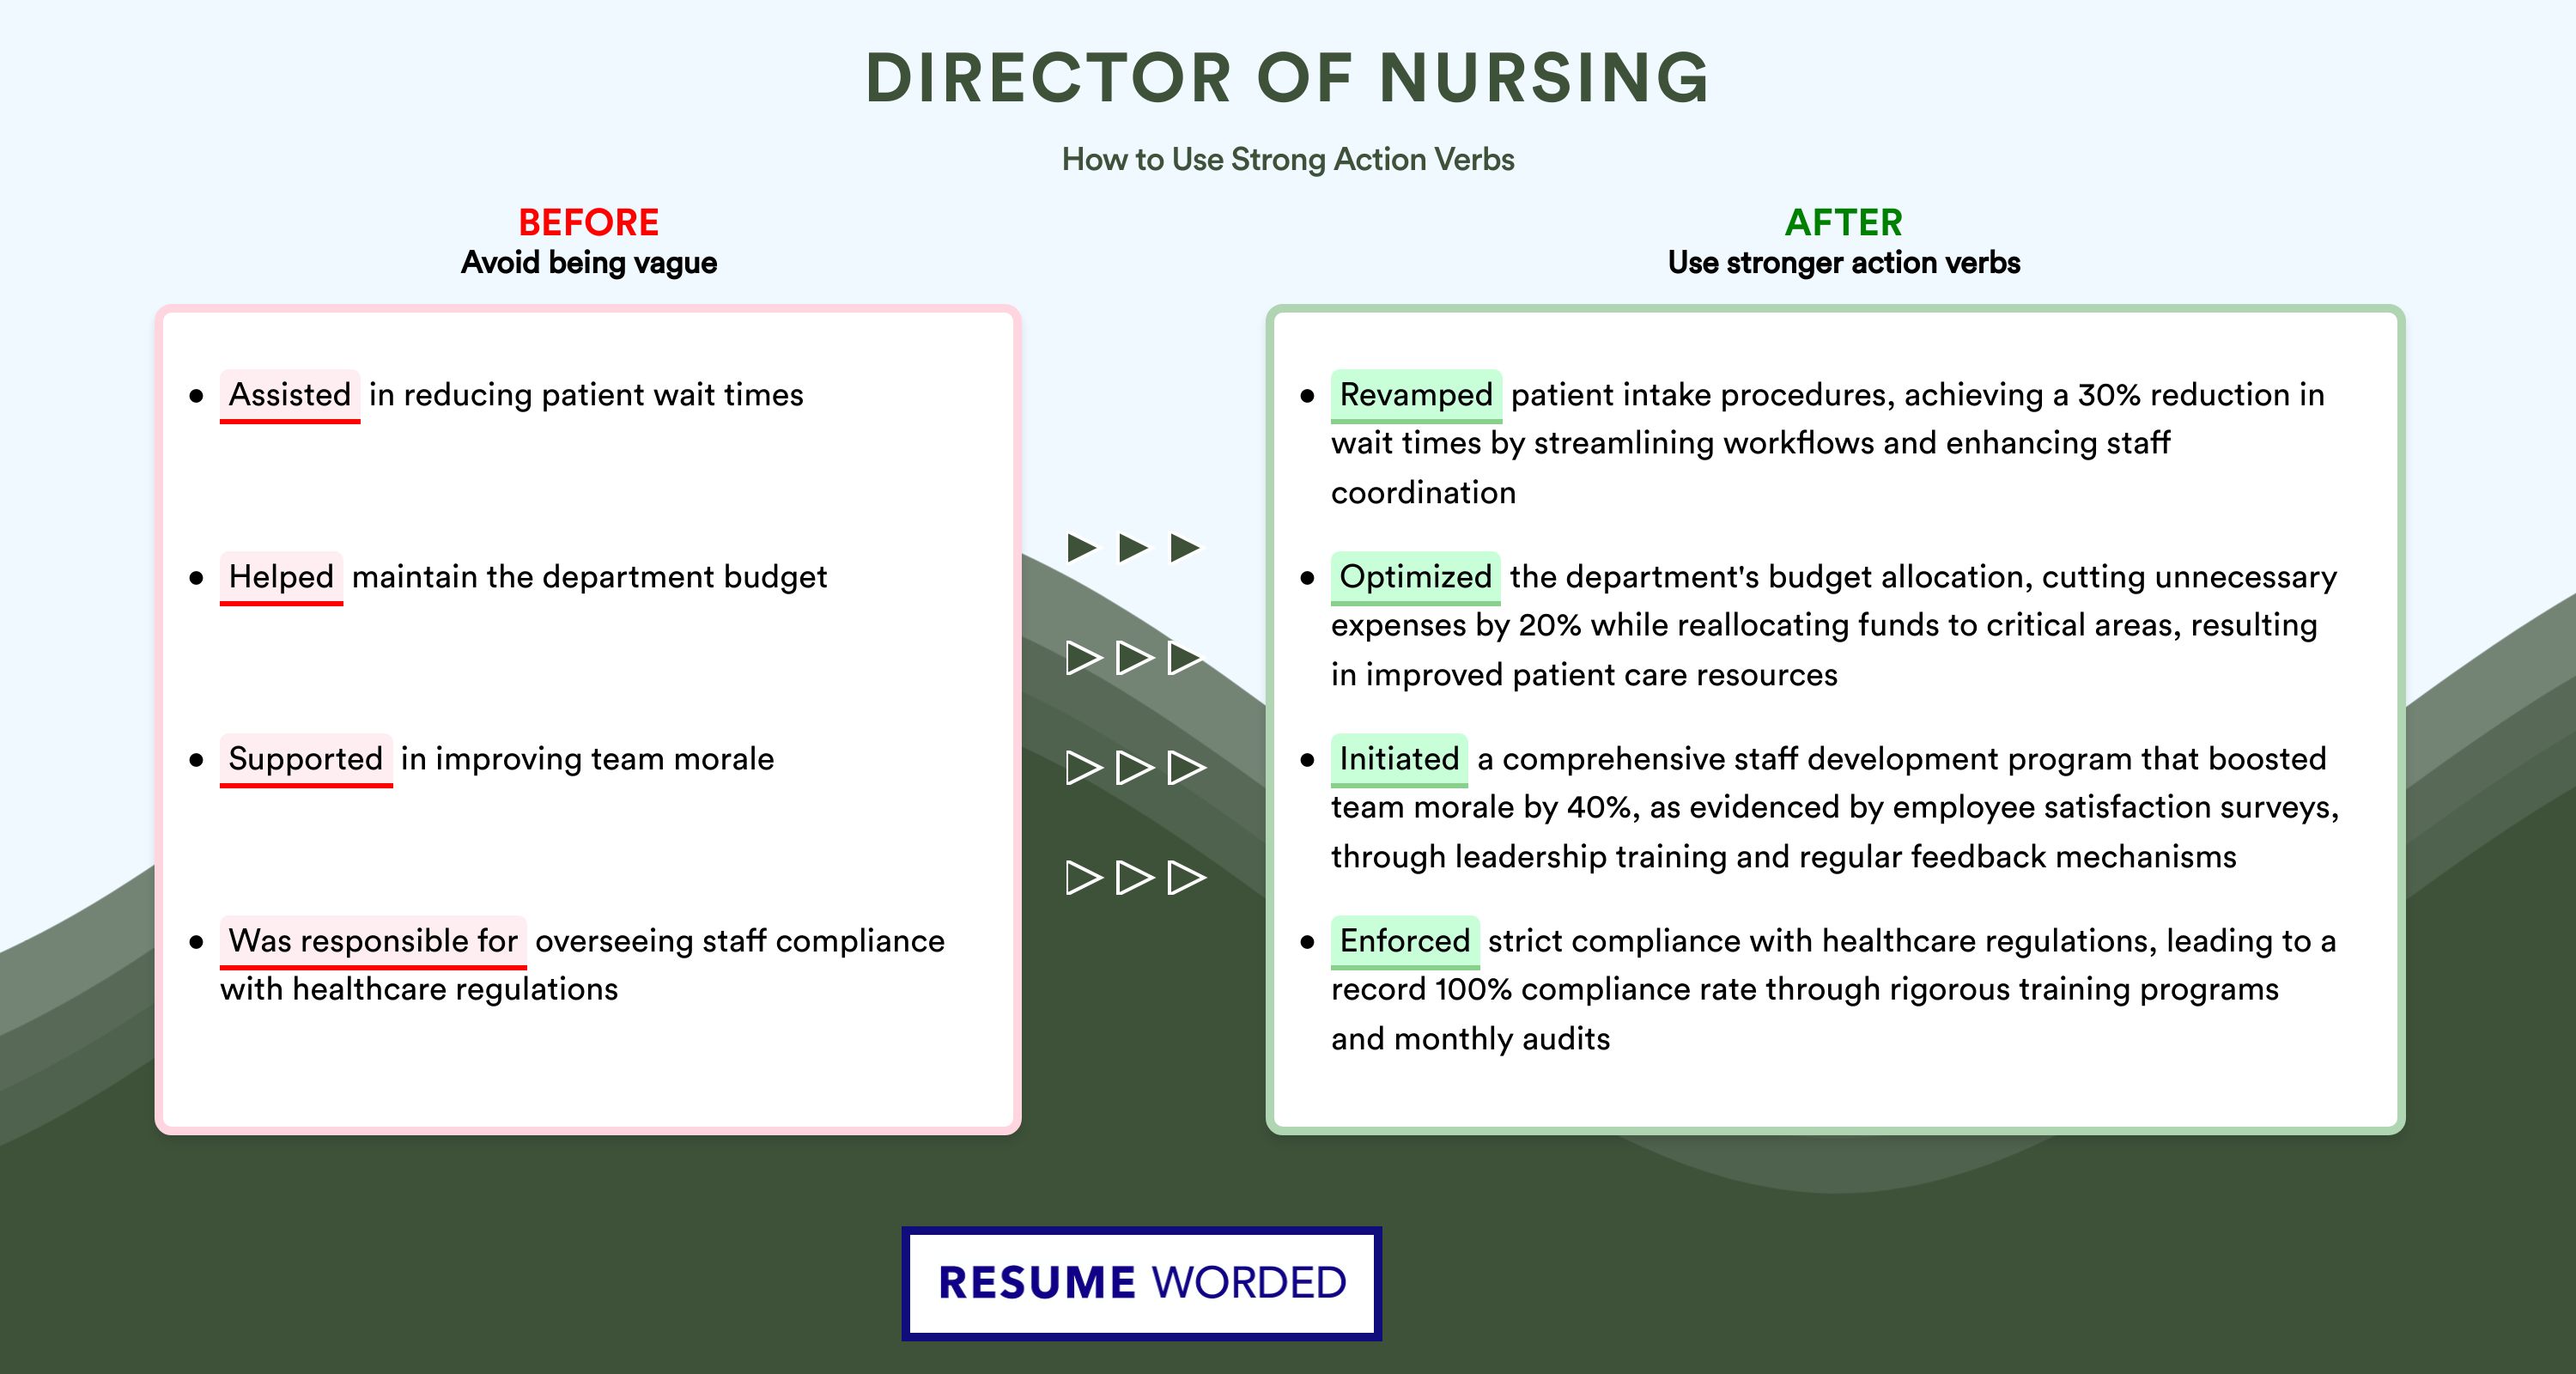 Action Verbs for Director of Nursing